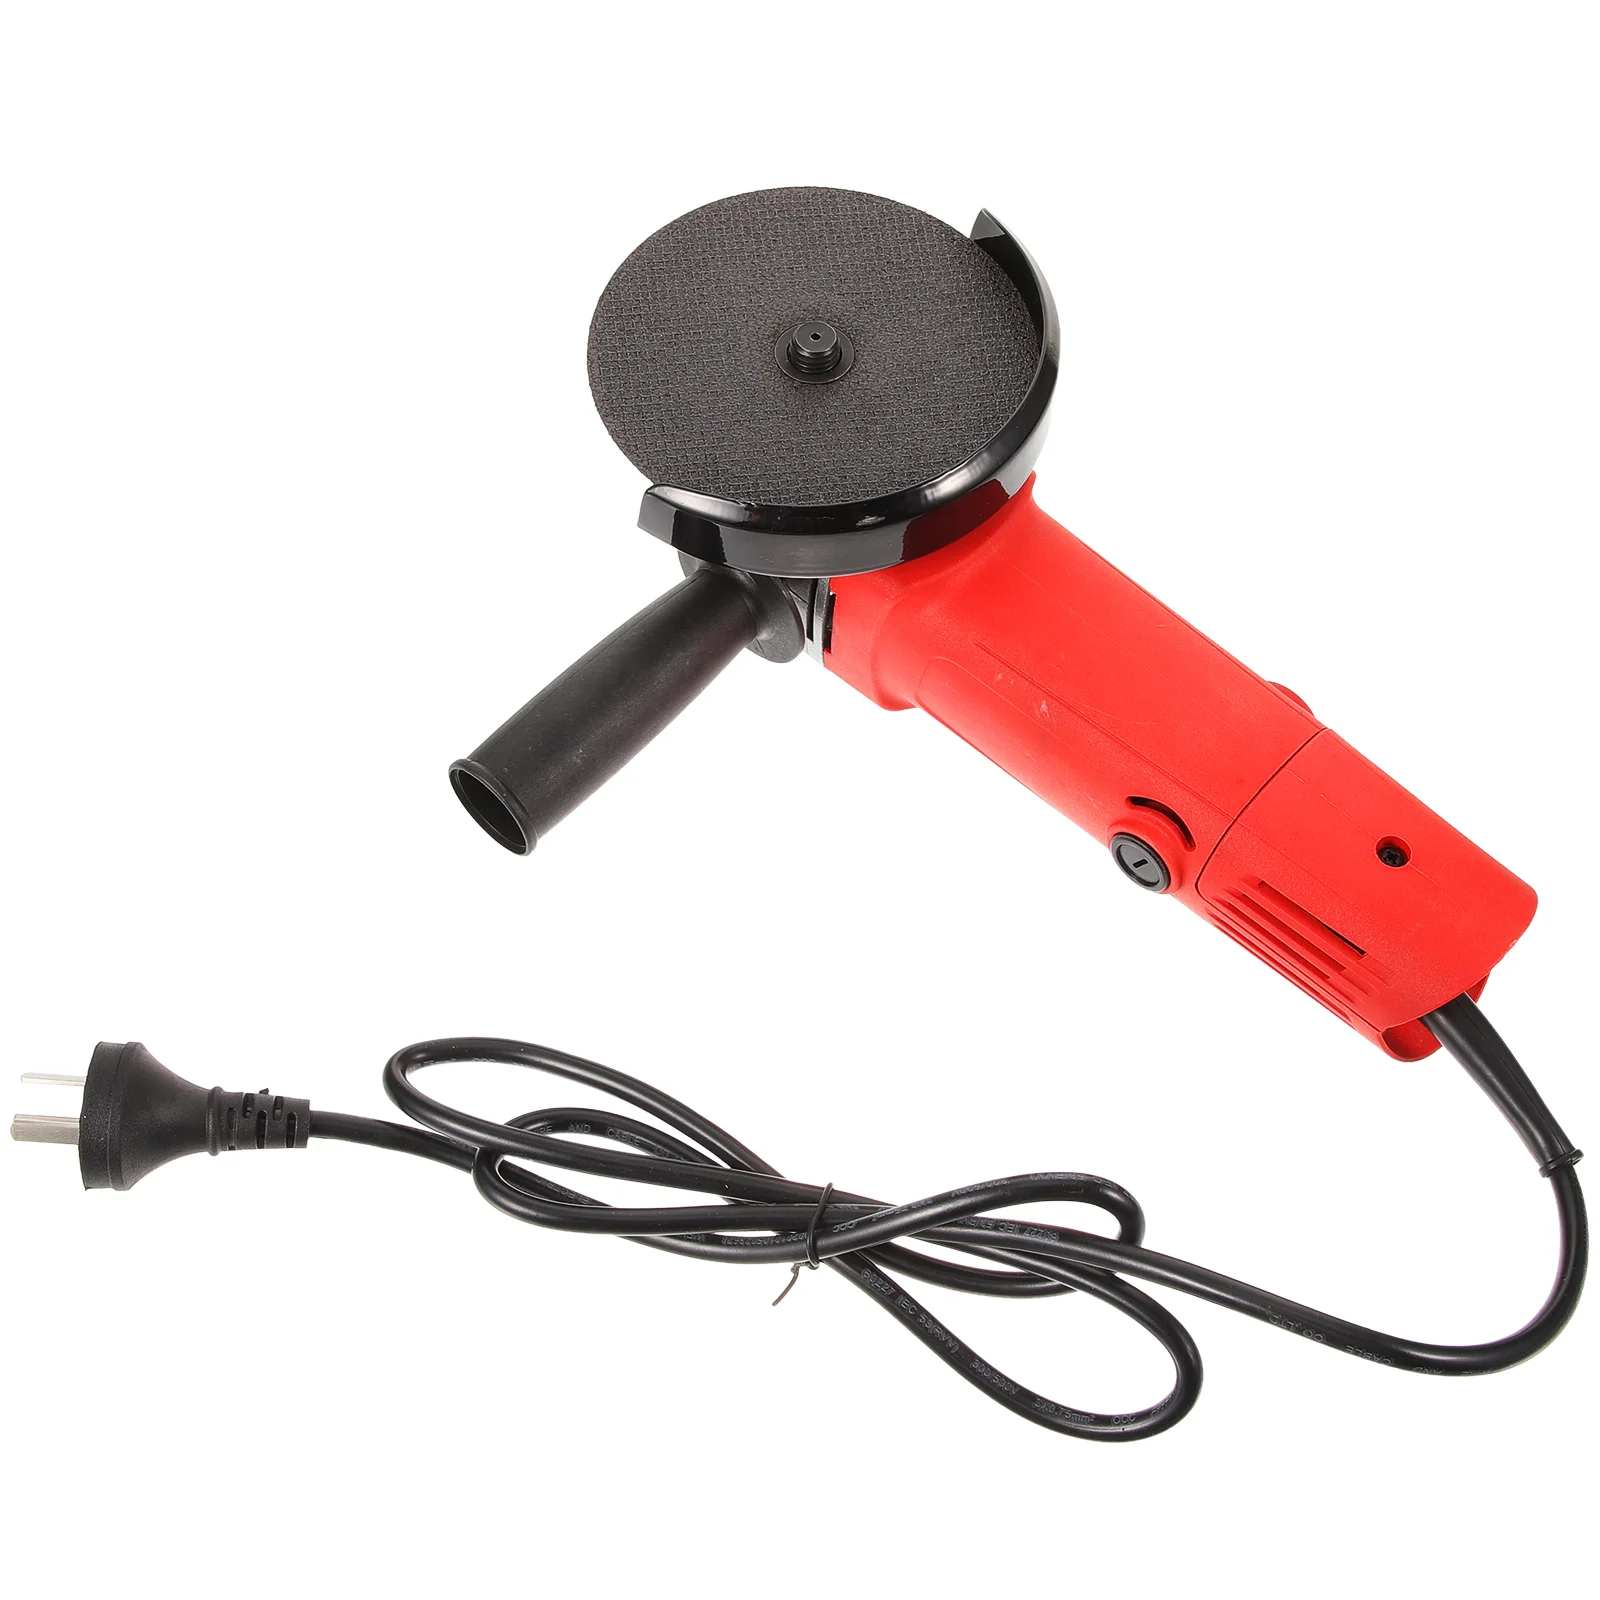 

Grinding Machine Brushed Angle Grinder Power Cutting Tool Polishing With Wheel Corded Electric Sander